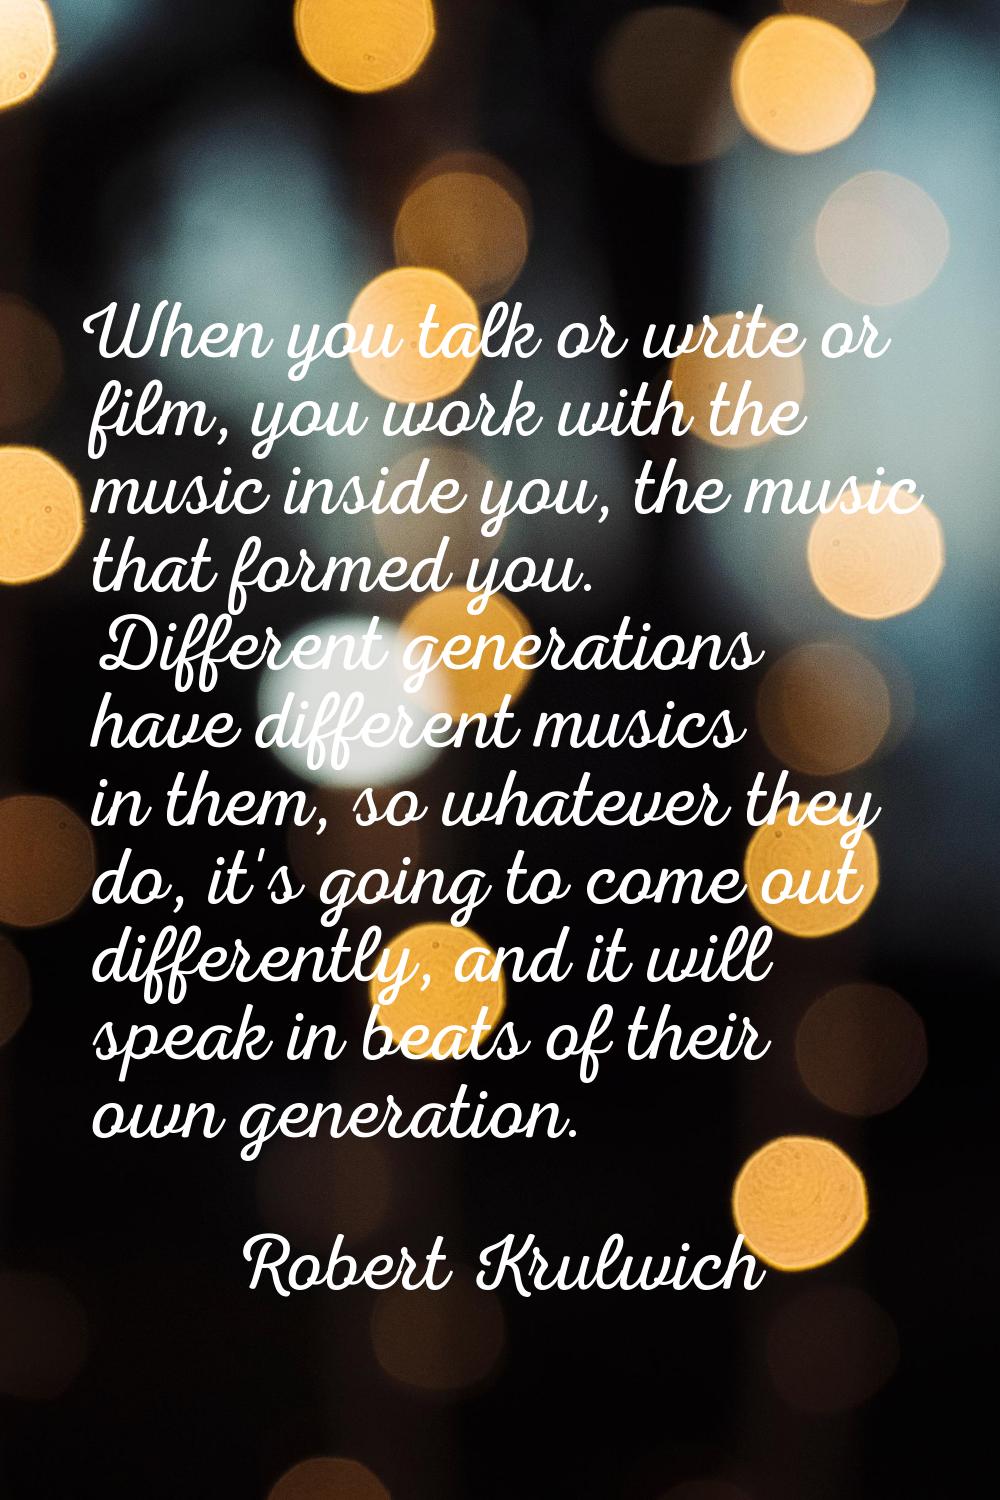 When you talk or write or film, you work with the music inside you, the music that formed you. Diff